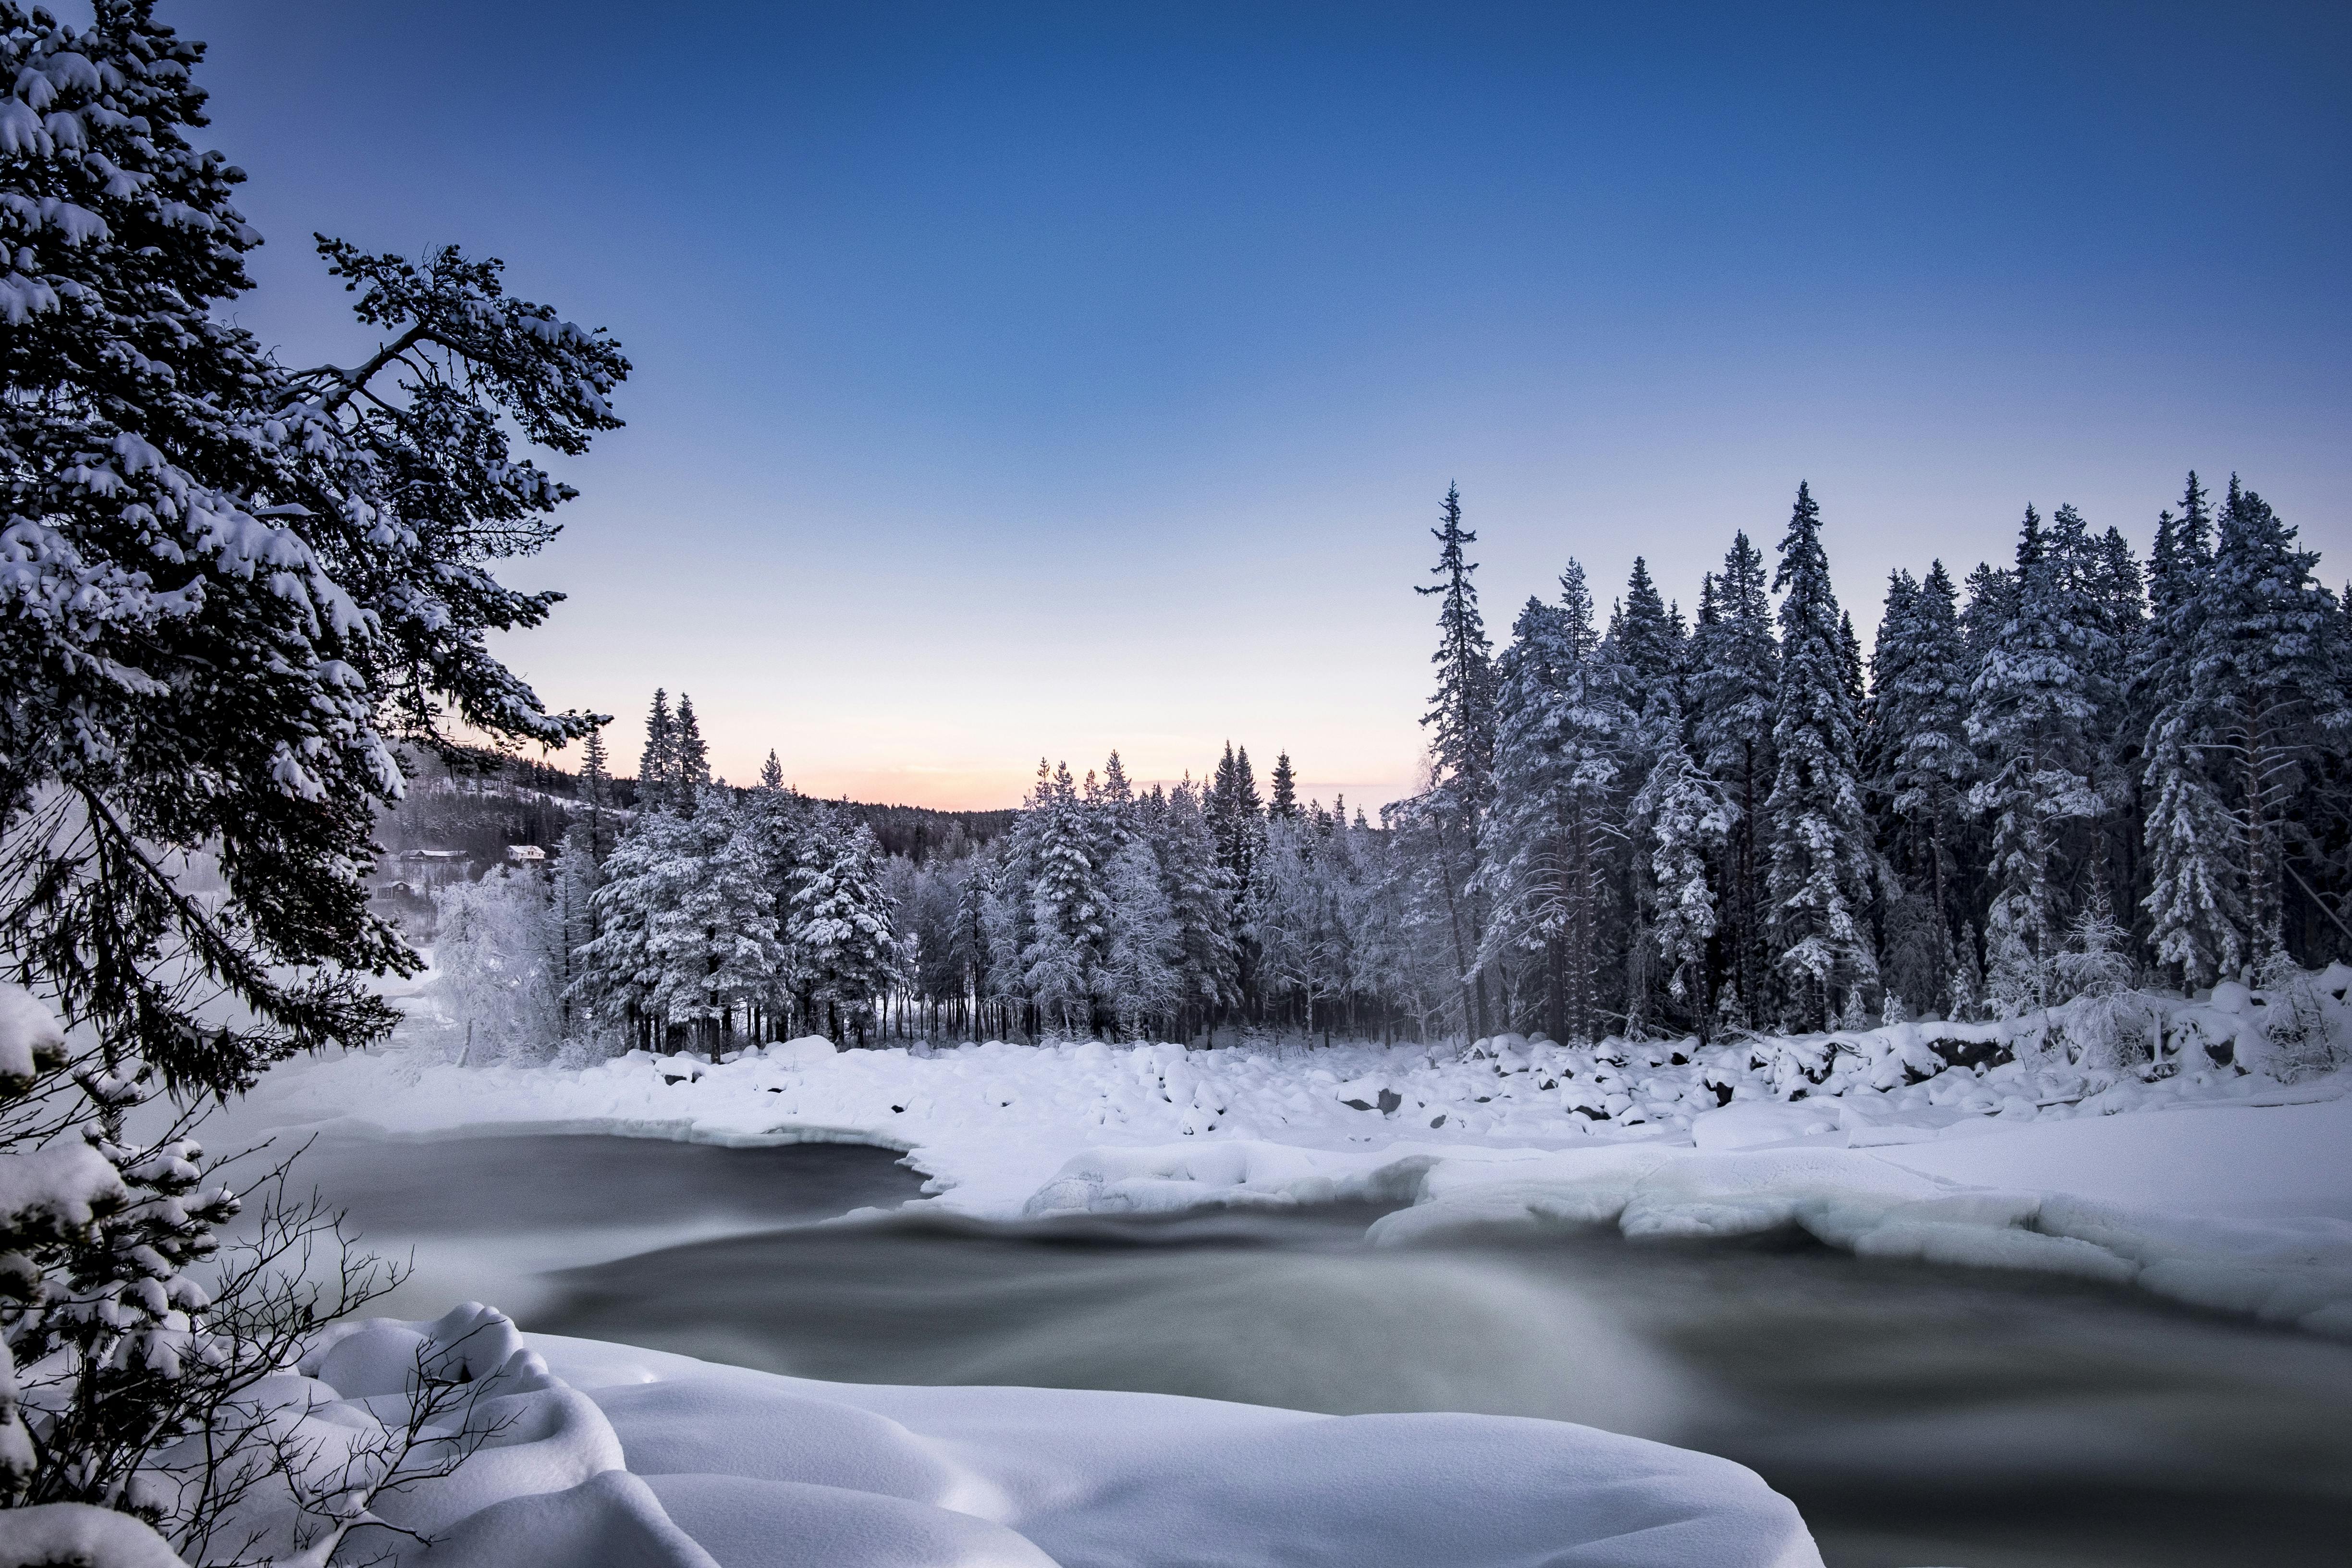 Guided winter nature tour in Storforsen